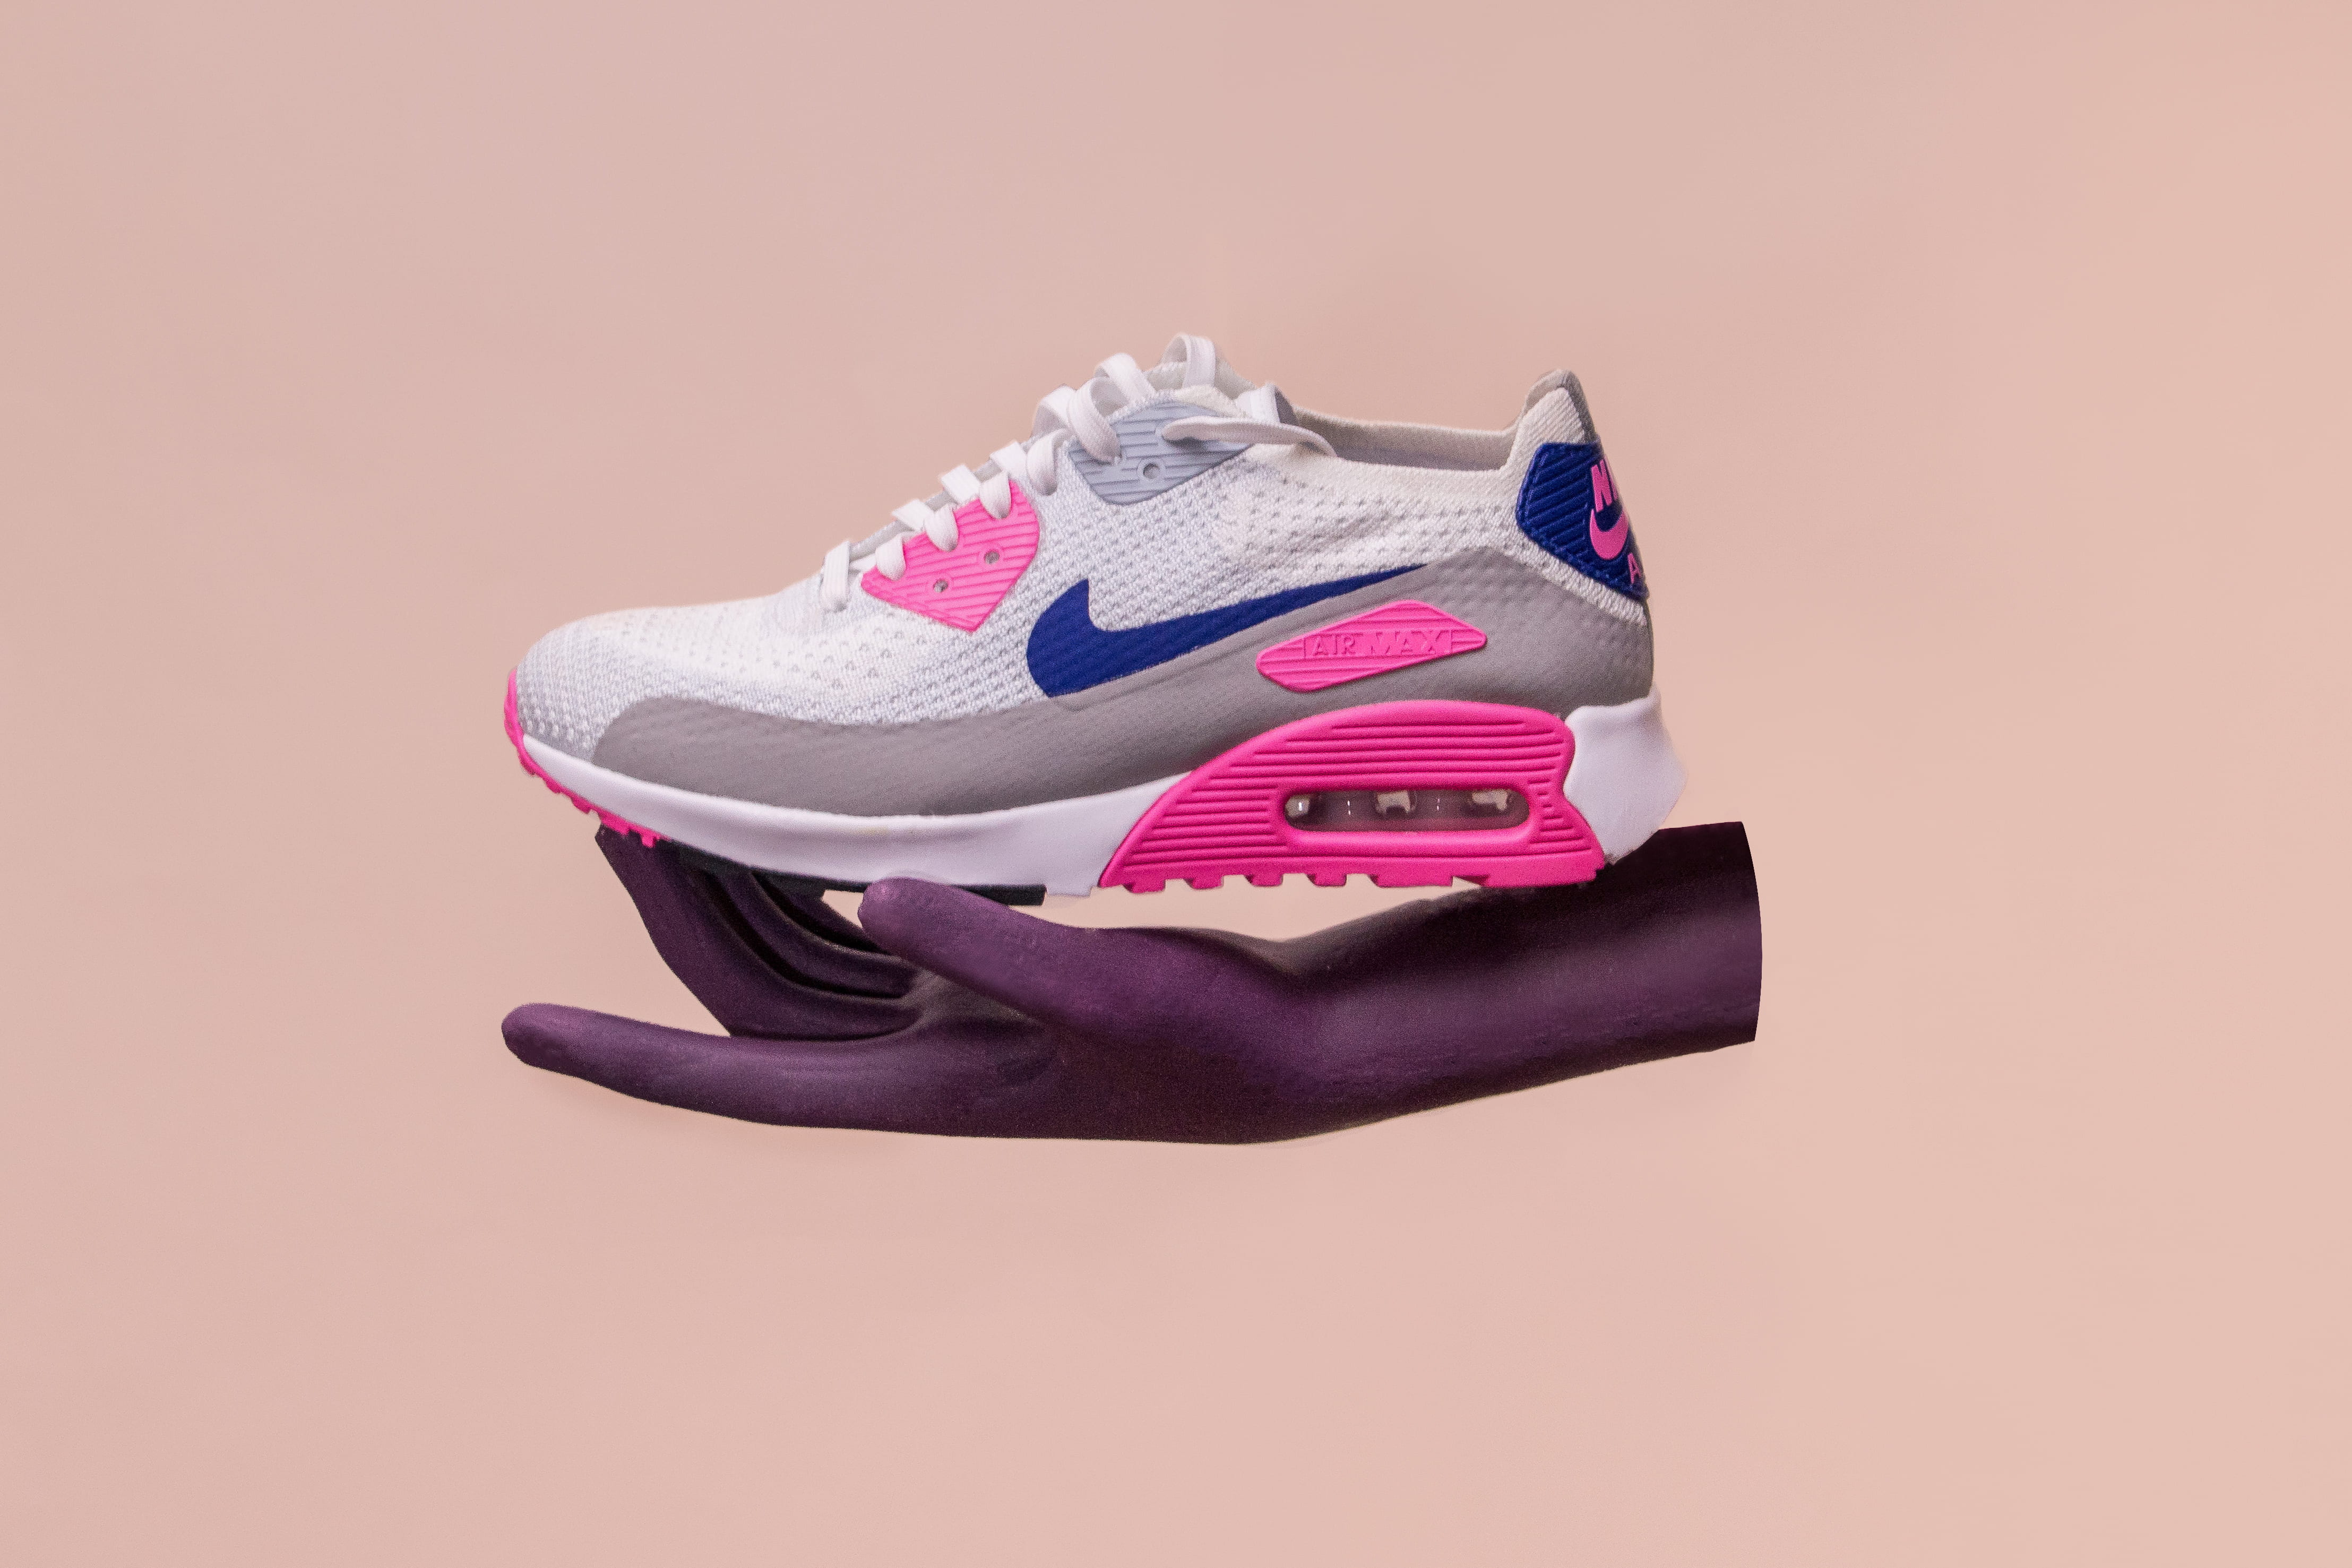 unpaired white, gray, and blue Nike Air Max 90 shoe, white, pink, and brown Nike Air Max 90 on person's hand